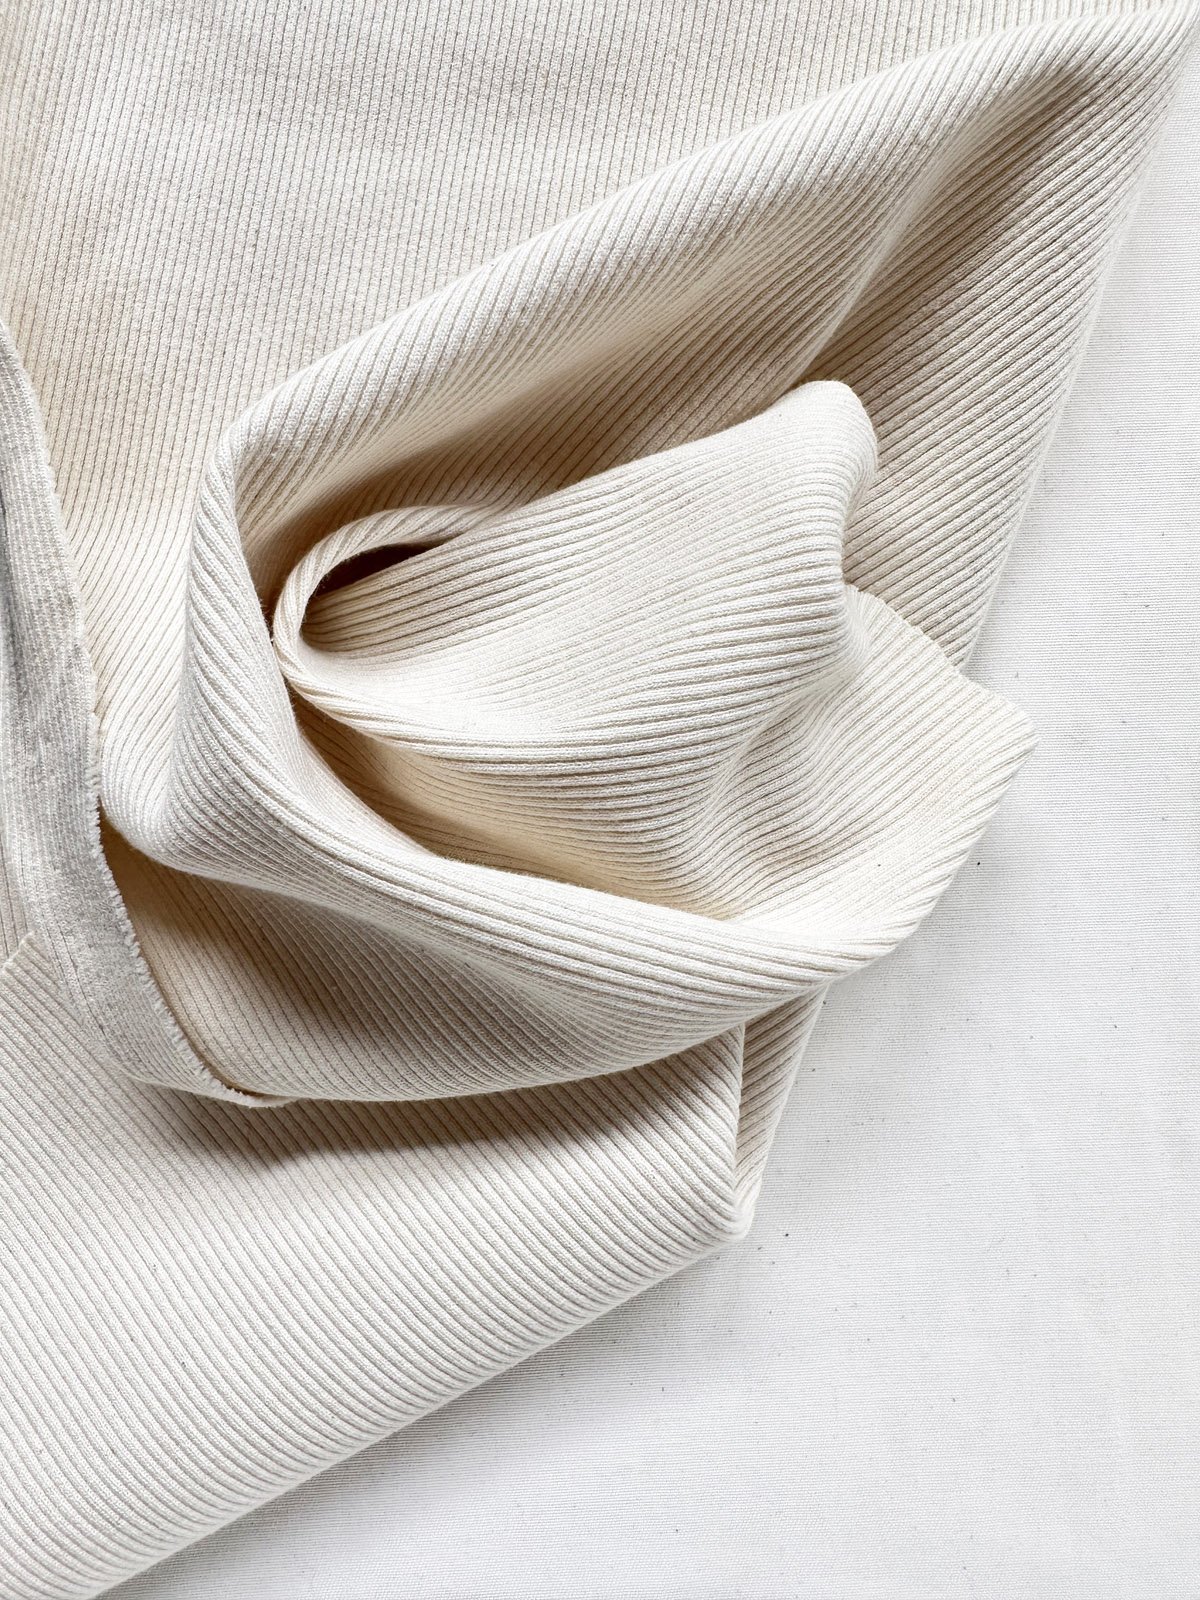 Fabric for Casual Active wear and Intimate dressing — L'Etoffe